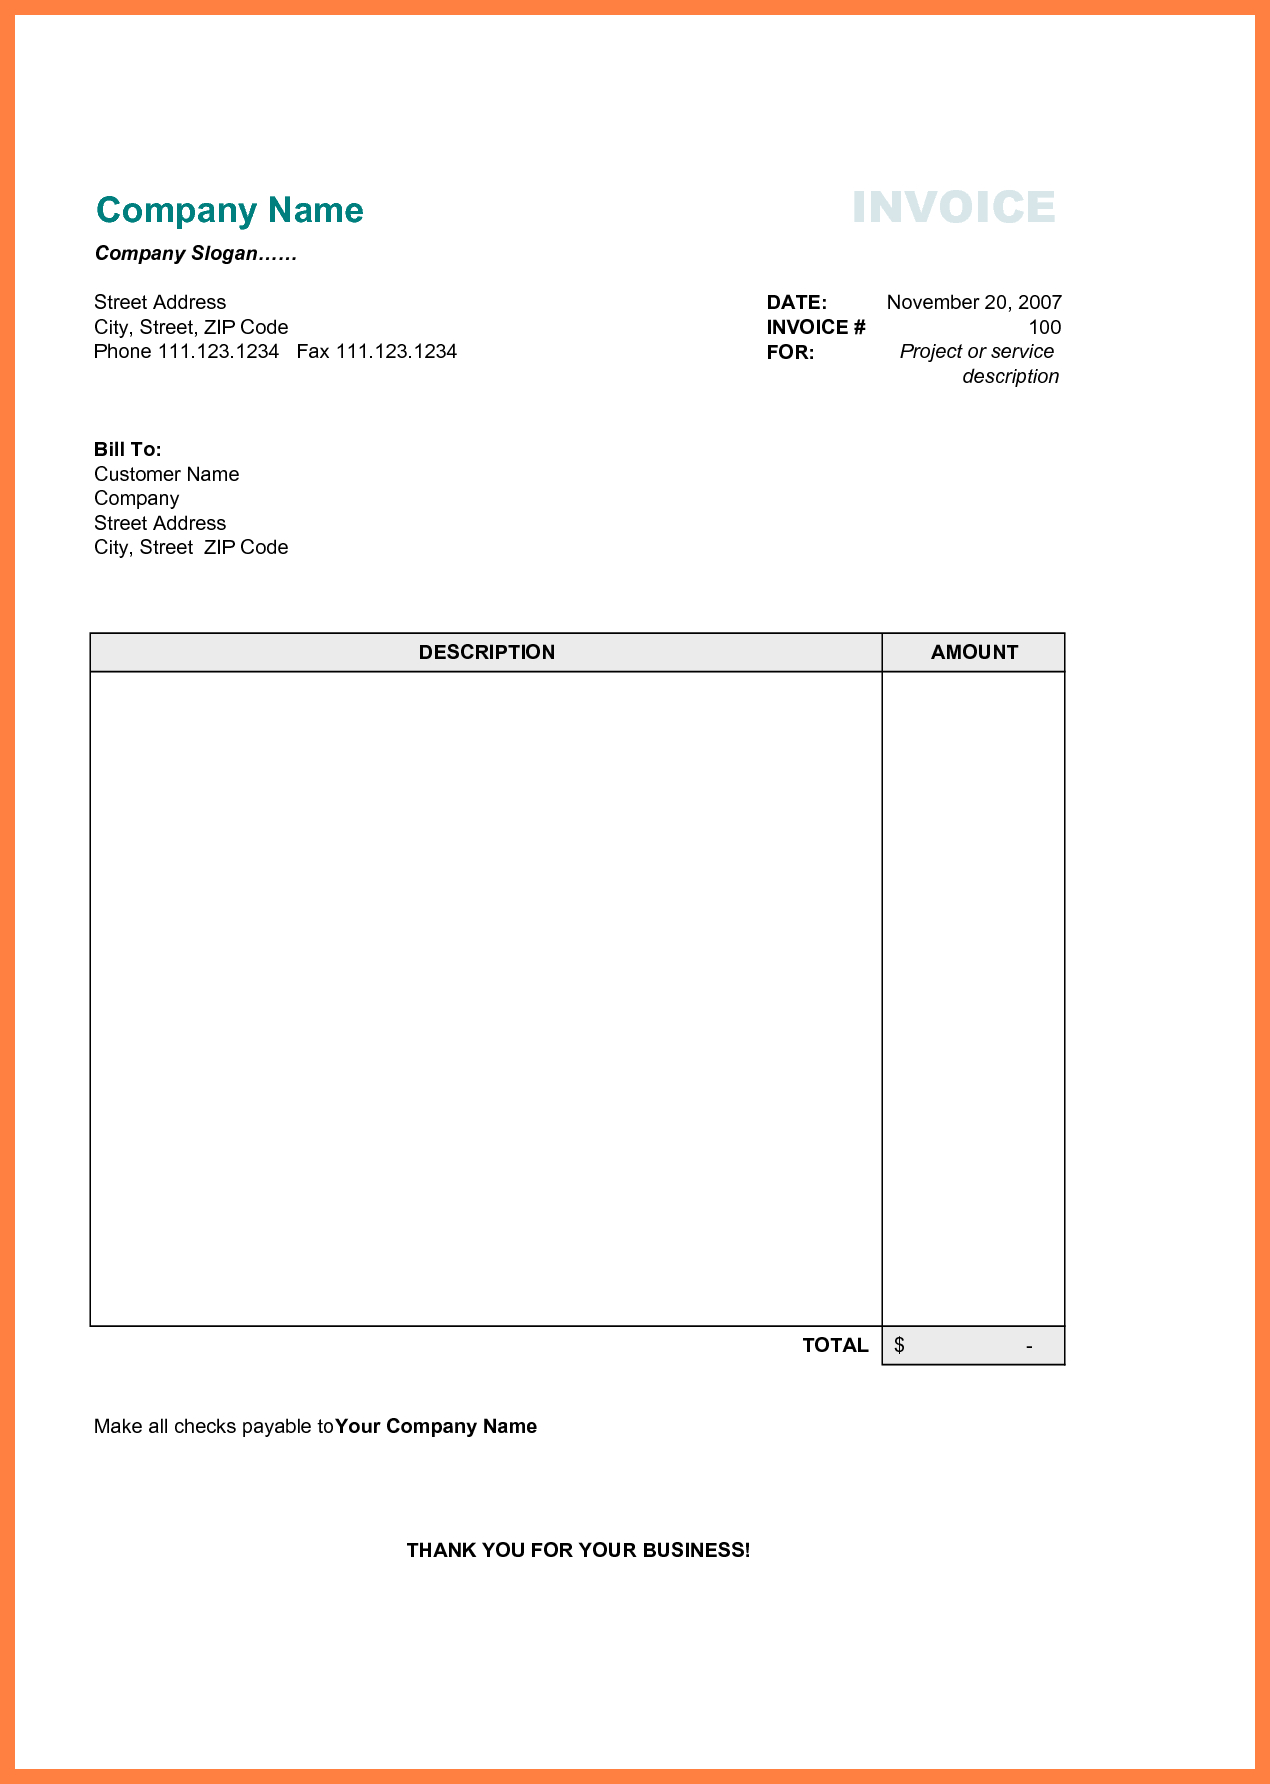 Free Printable Business Invoice Template - Invoice Format In Excel - Free Invoices Online Printable